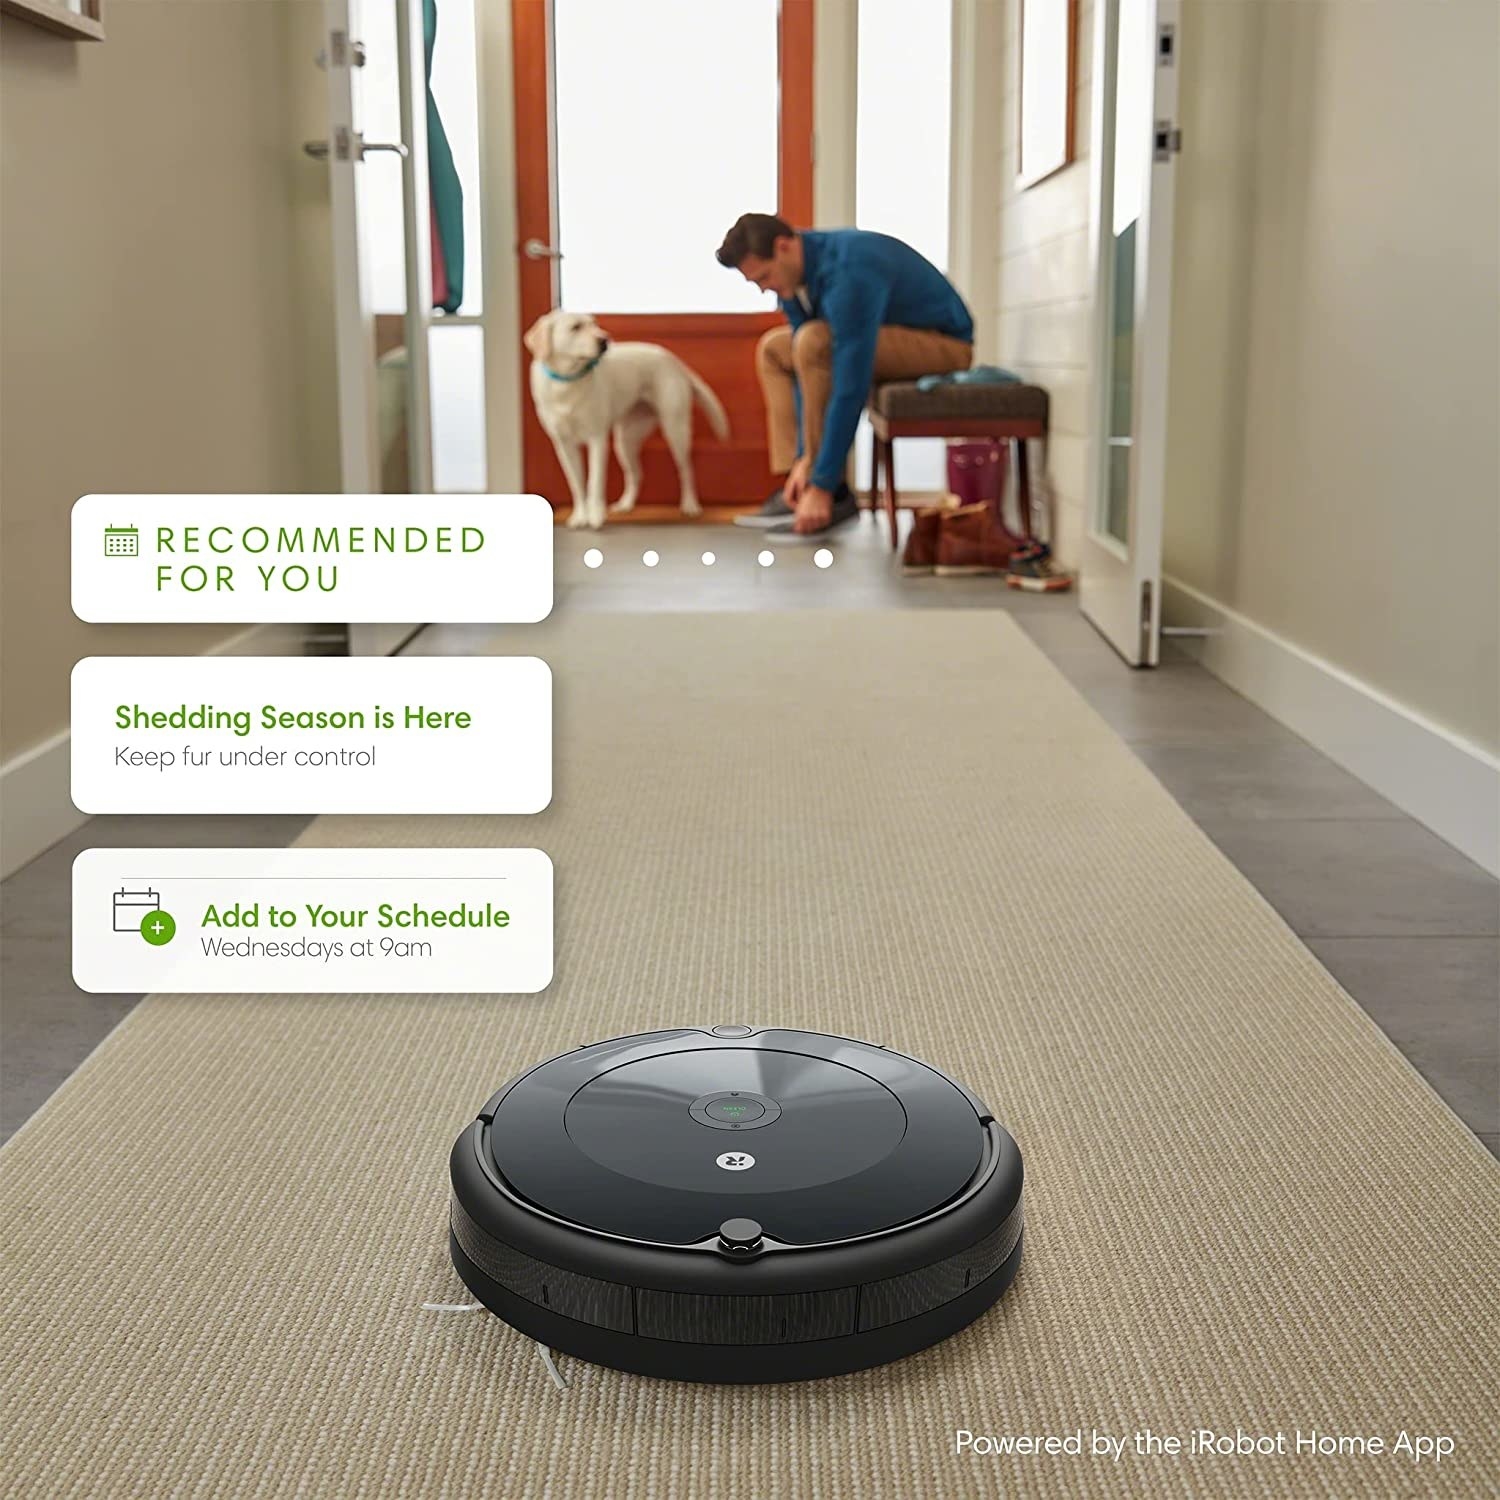 Small round black robot vacuum on a carpeted floor with text blurbs above it making cleaning recommendations